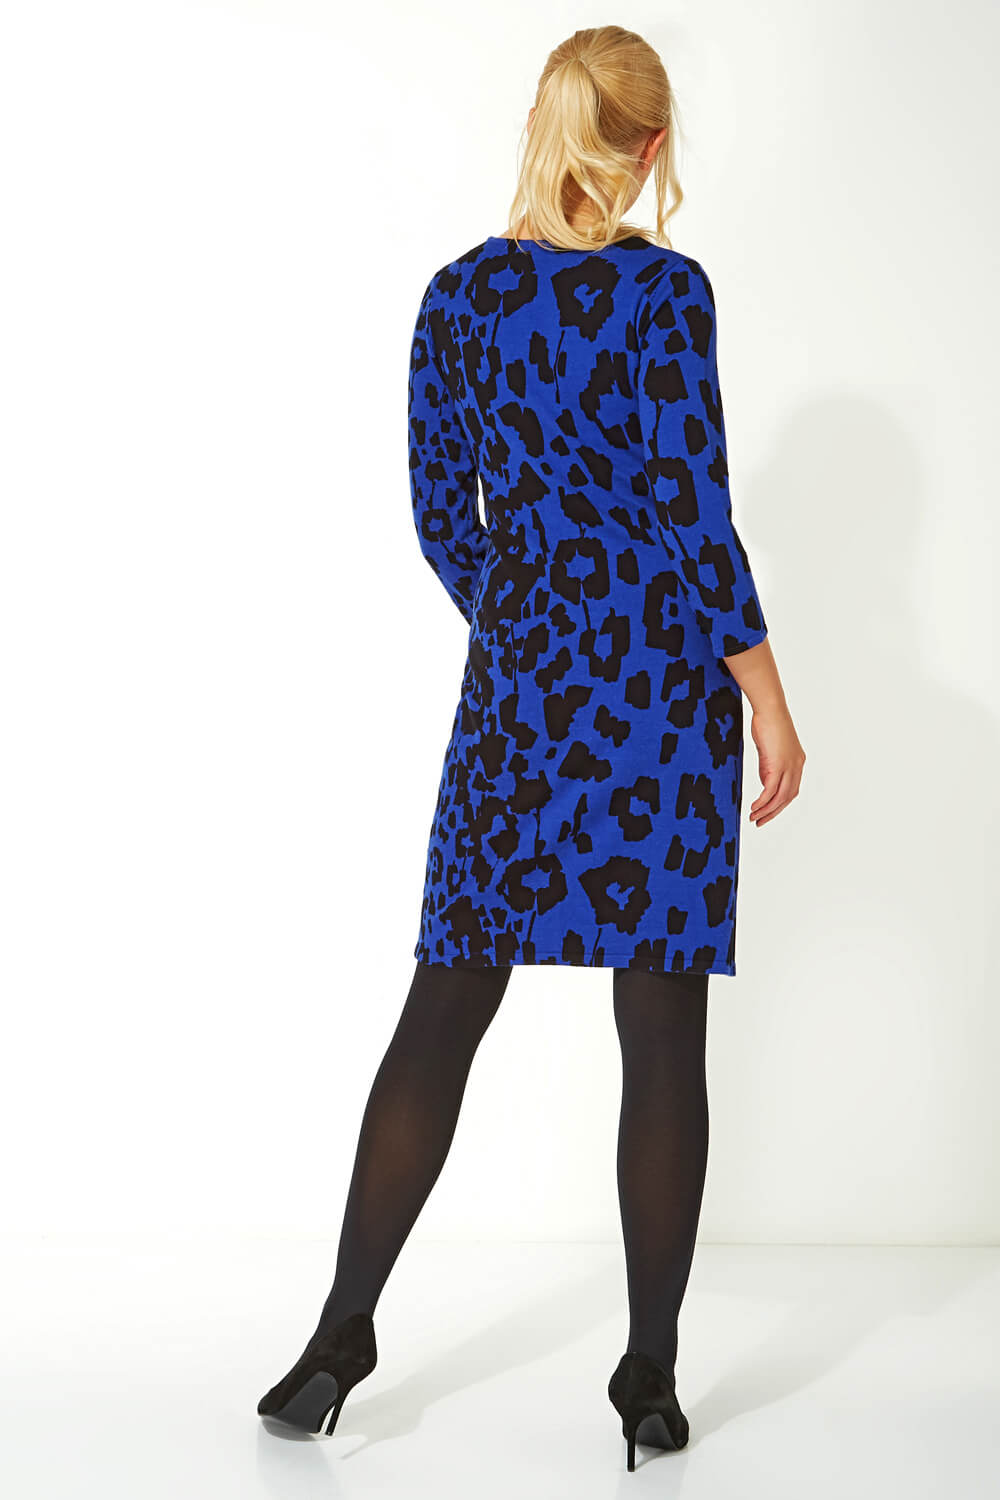 Royal Blue Leopard Print Knitted Dress, Image 3 of 4